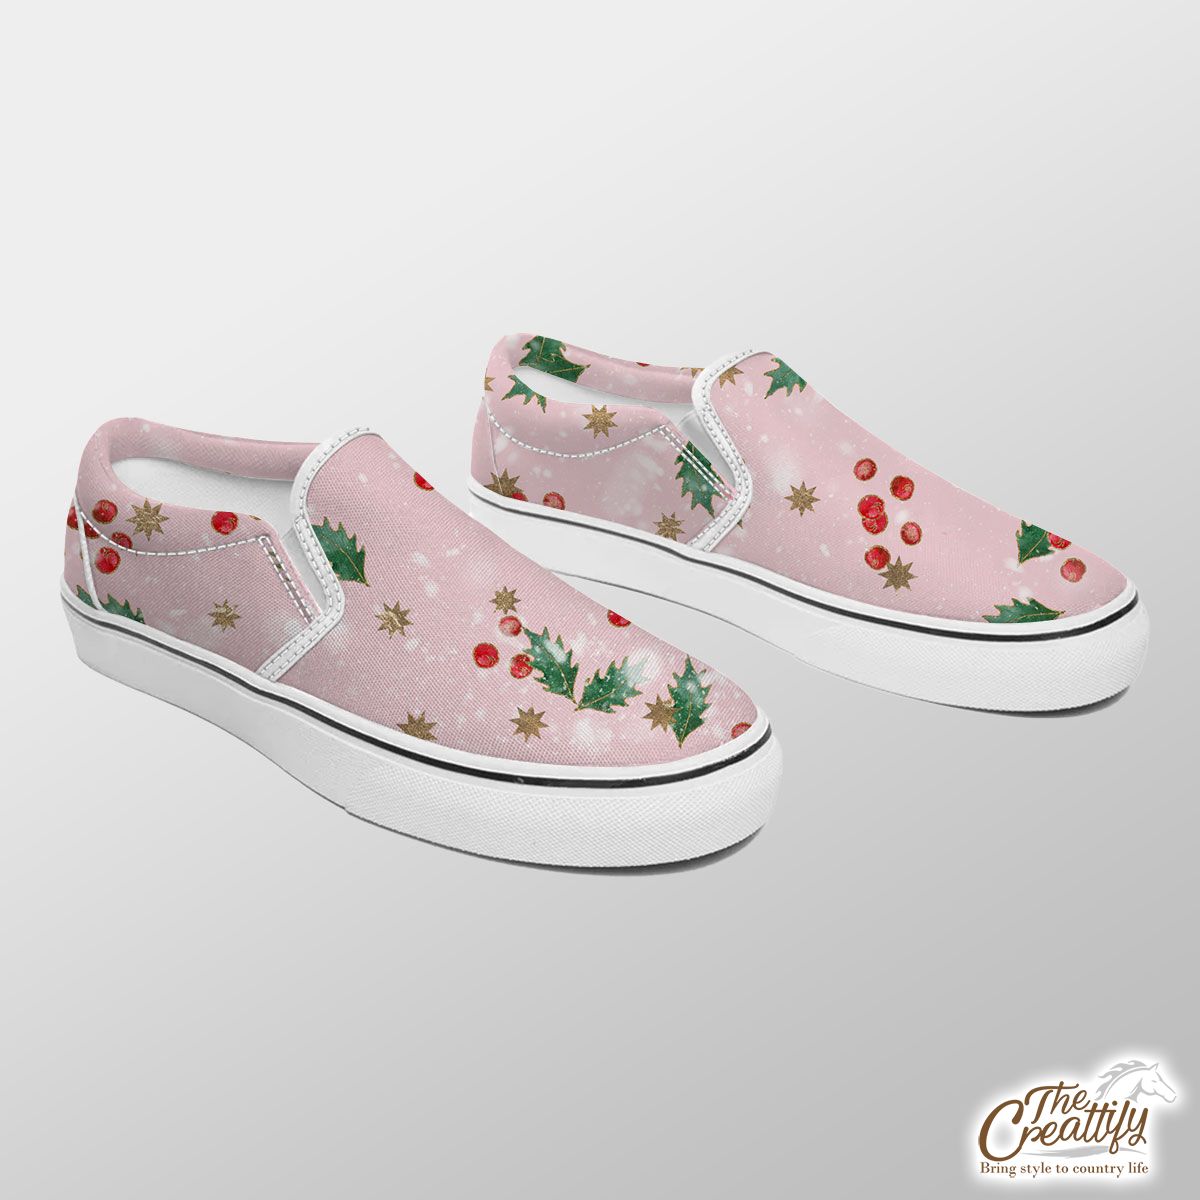 Holly Leaf With Christmas Star Pattern Slip On Sneakers